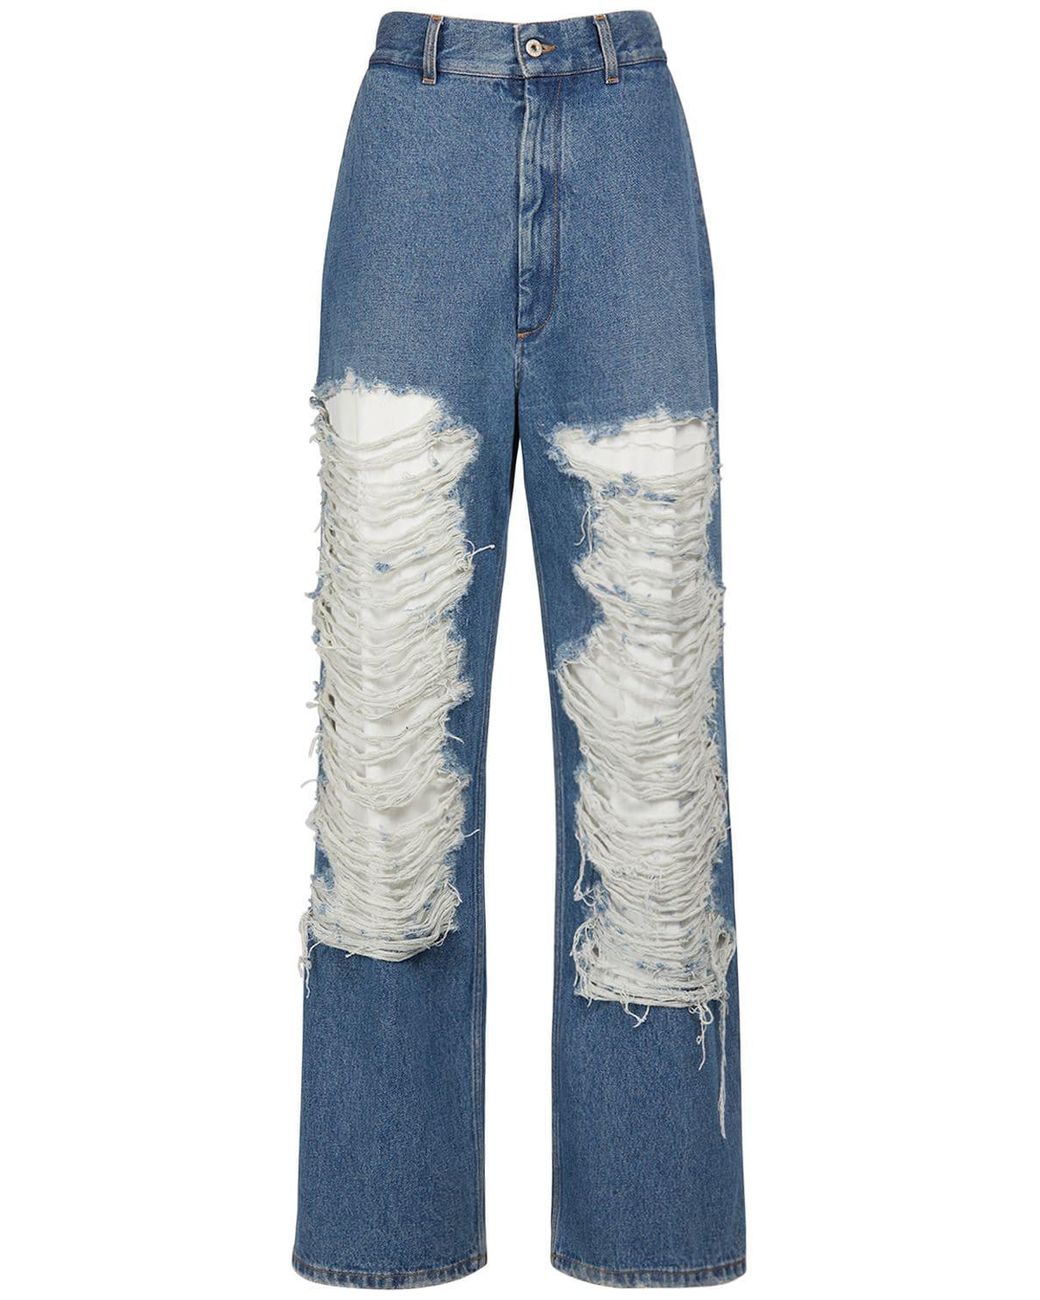 Loewe Ripped Cotton Denim Baggy Jeans in Blue | Lyst